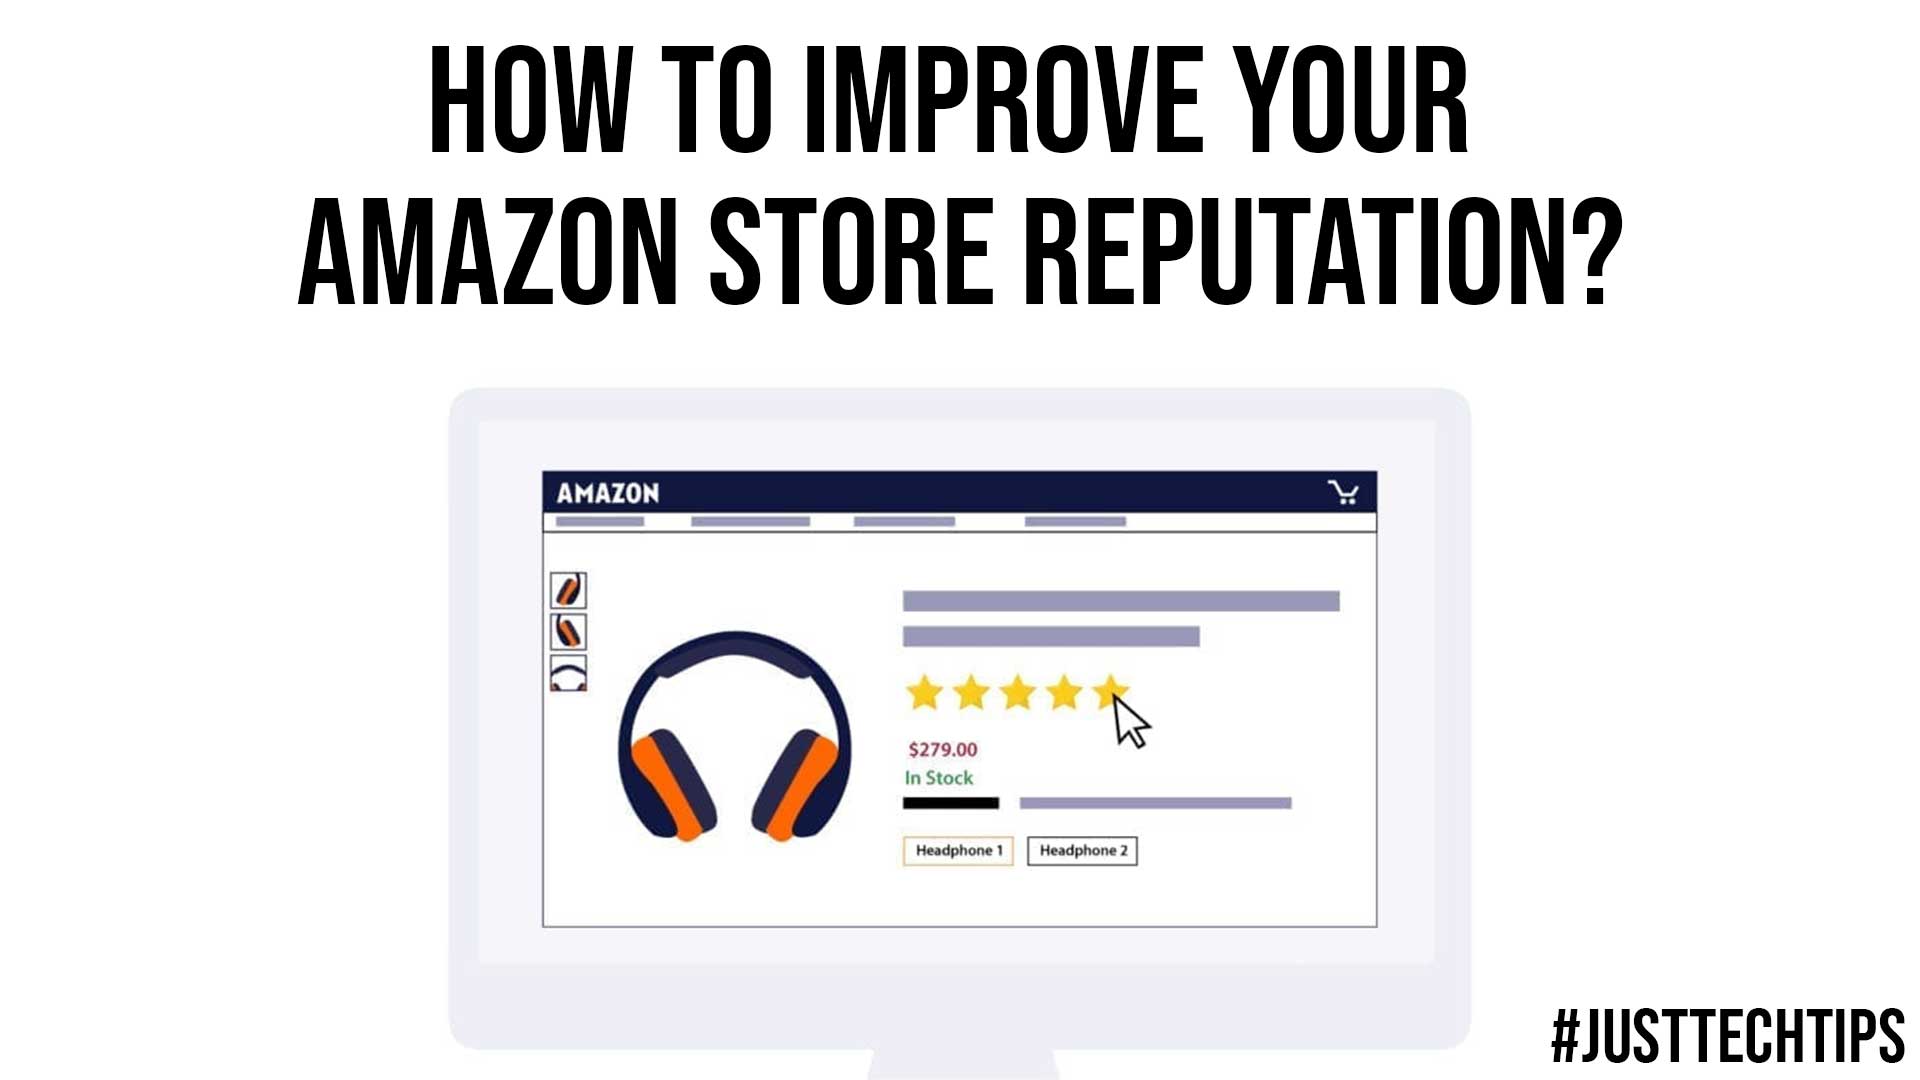 How to Improve Your Amazon Store Reputation